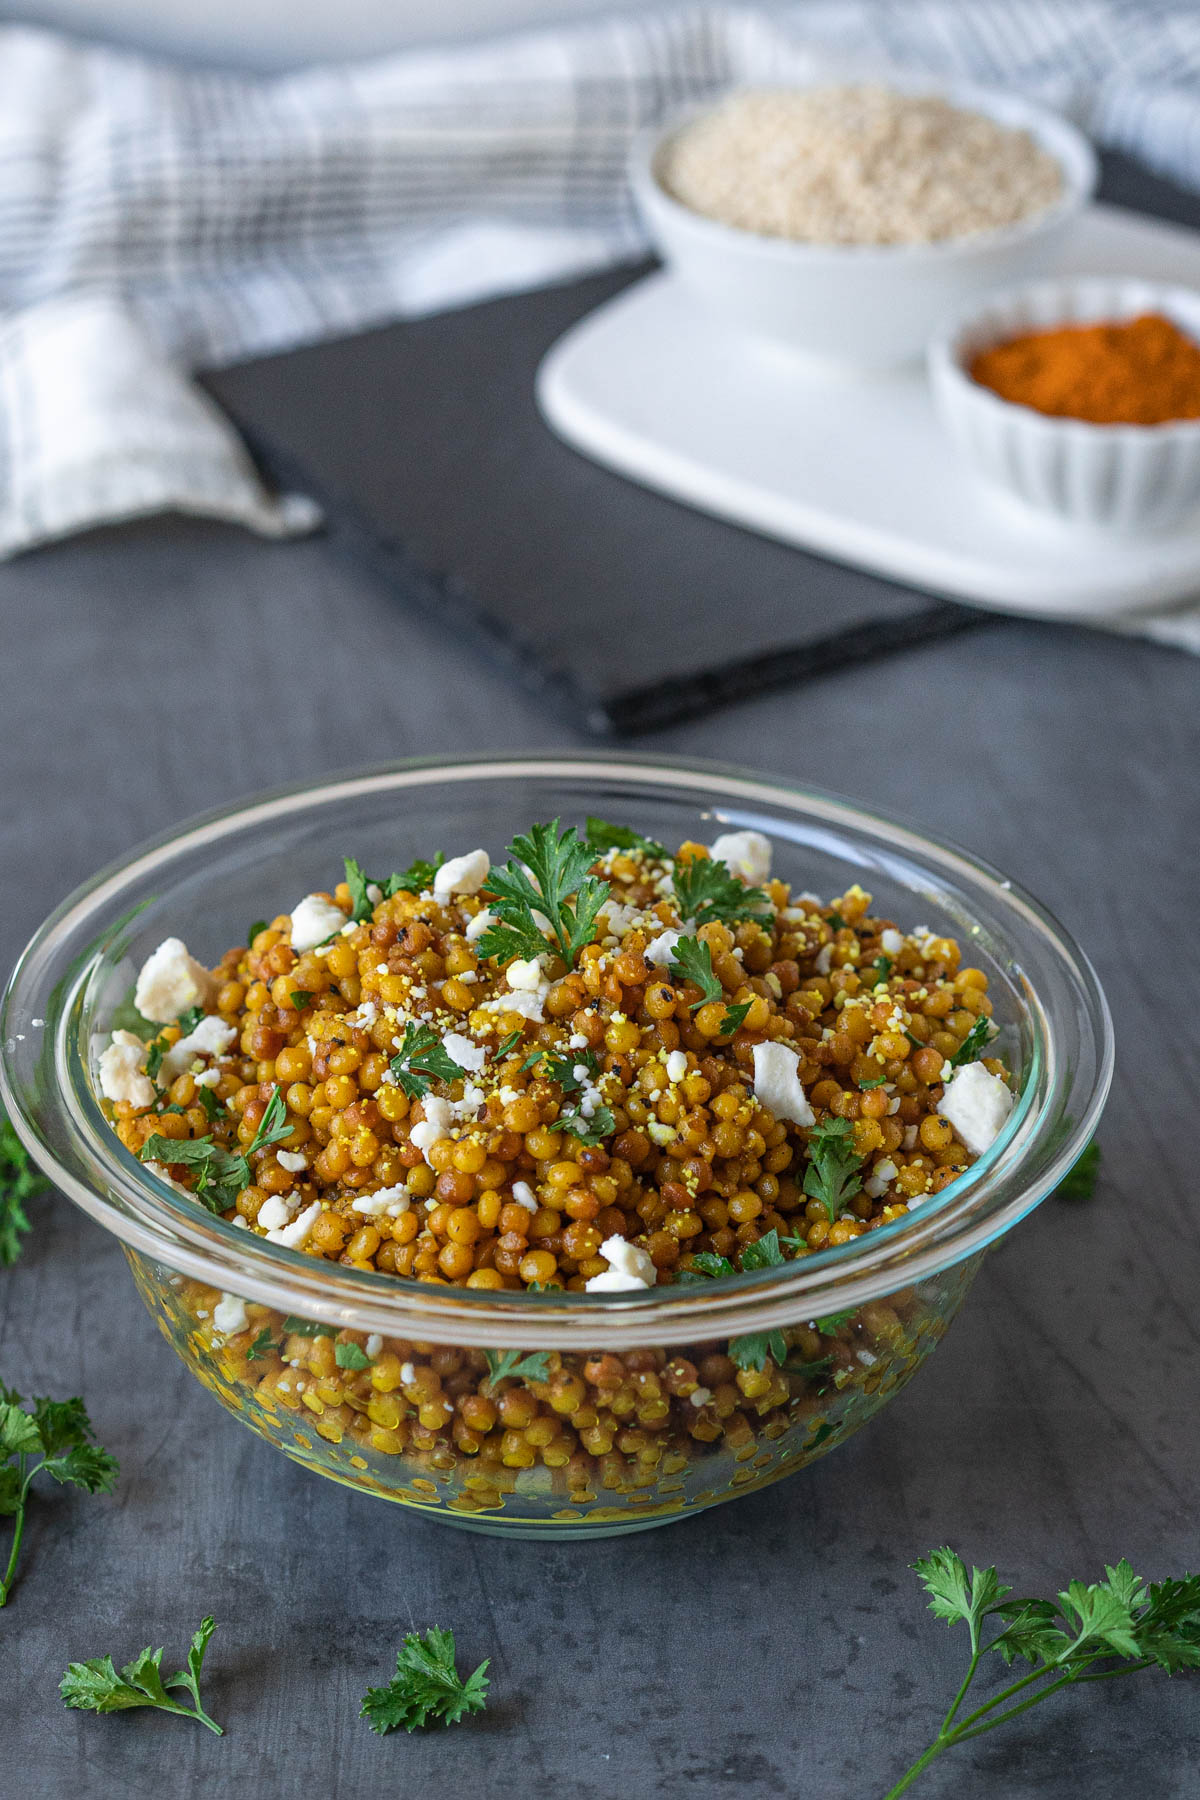 Clear bowl filled with golden couscous, garnished with fresh parsley and crumbled feta. The bowl is on a gray surface that has fresh parsley scattered across it. Blurred in the background, there are black and white serving platters with bowls of dry couscous and ground turmeric in them.